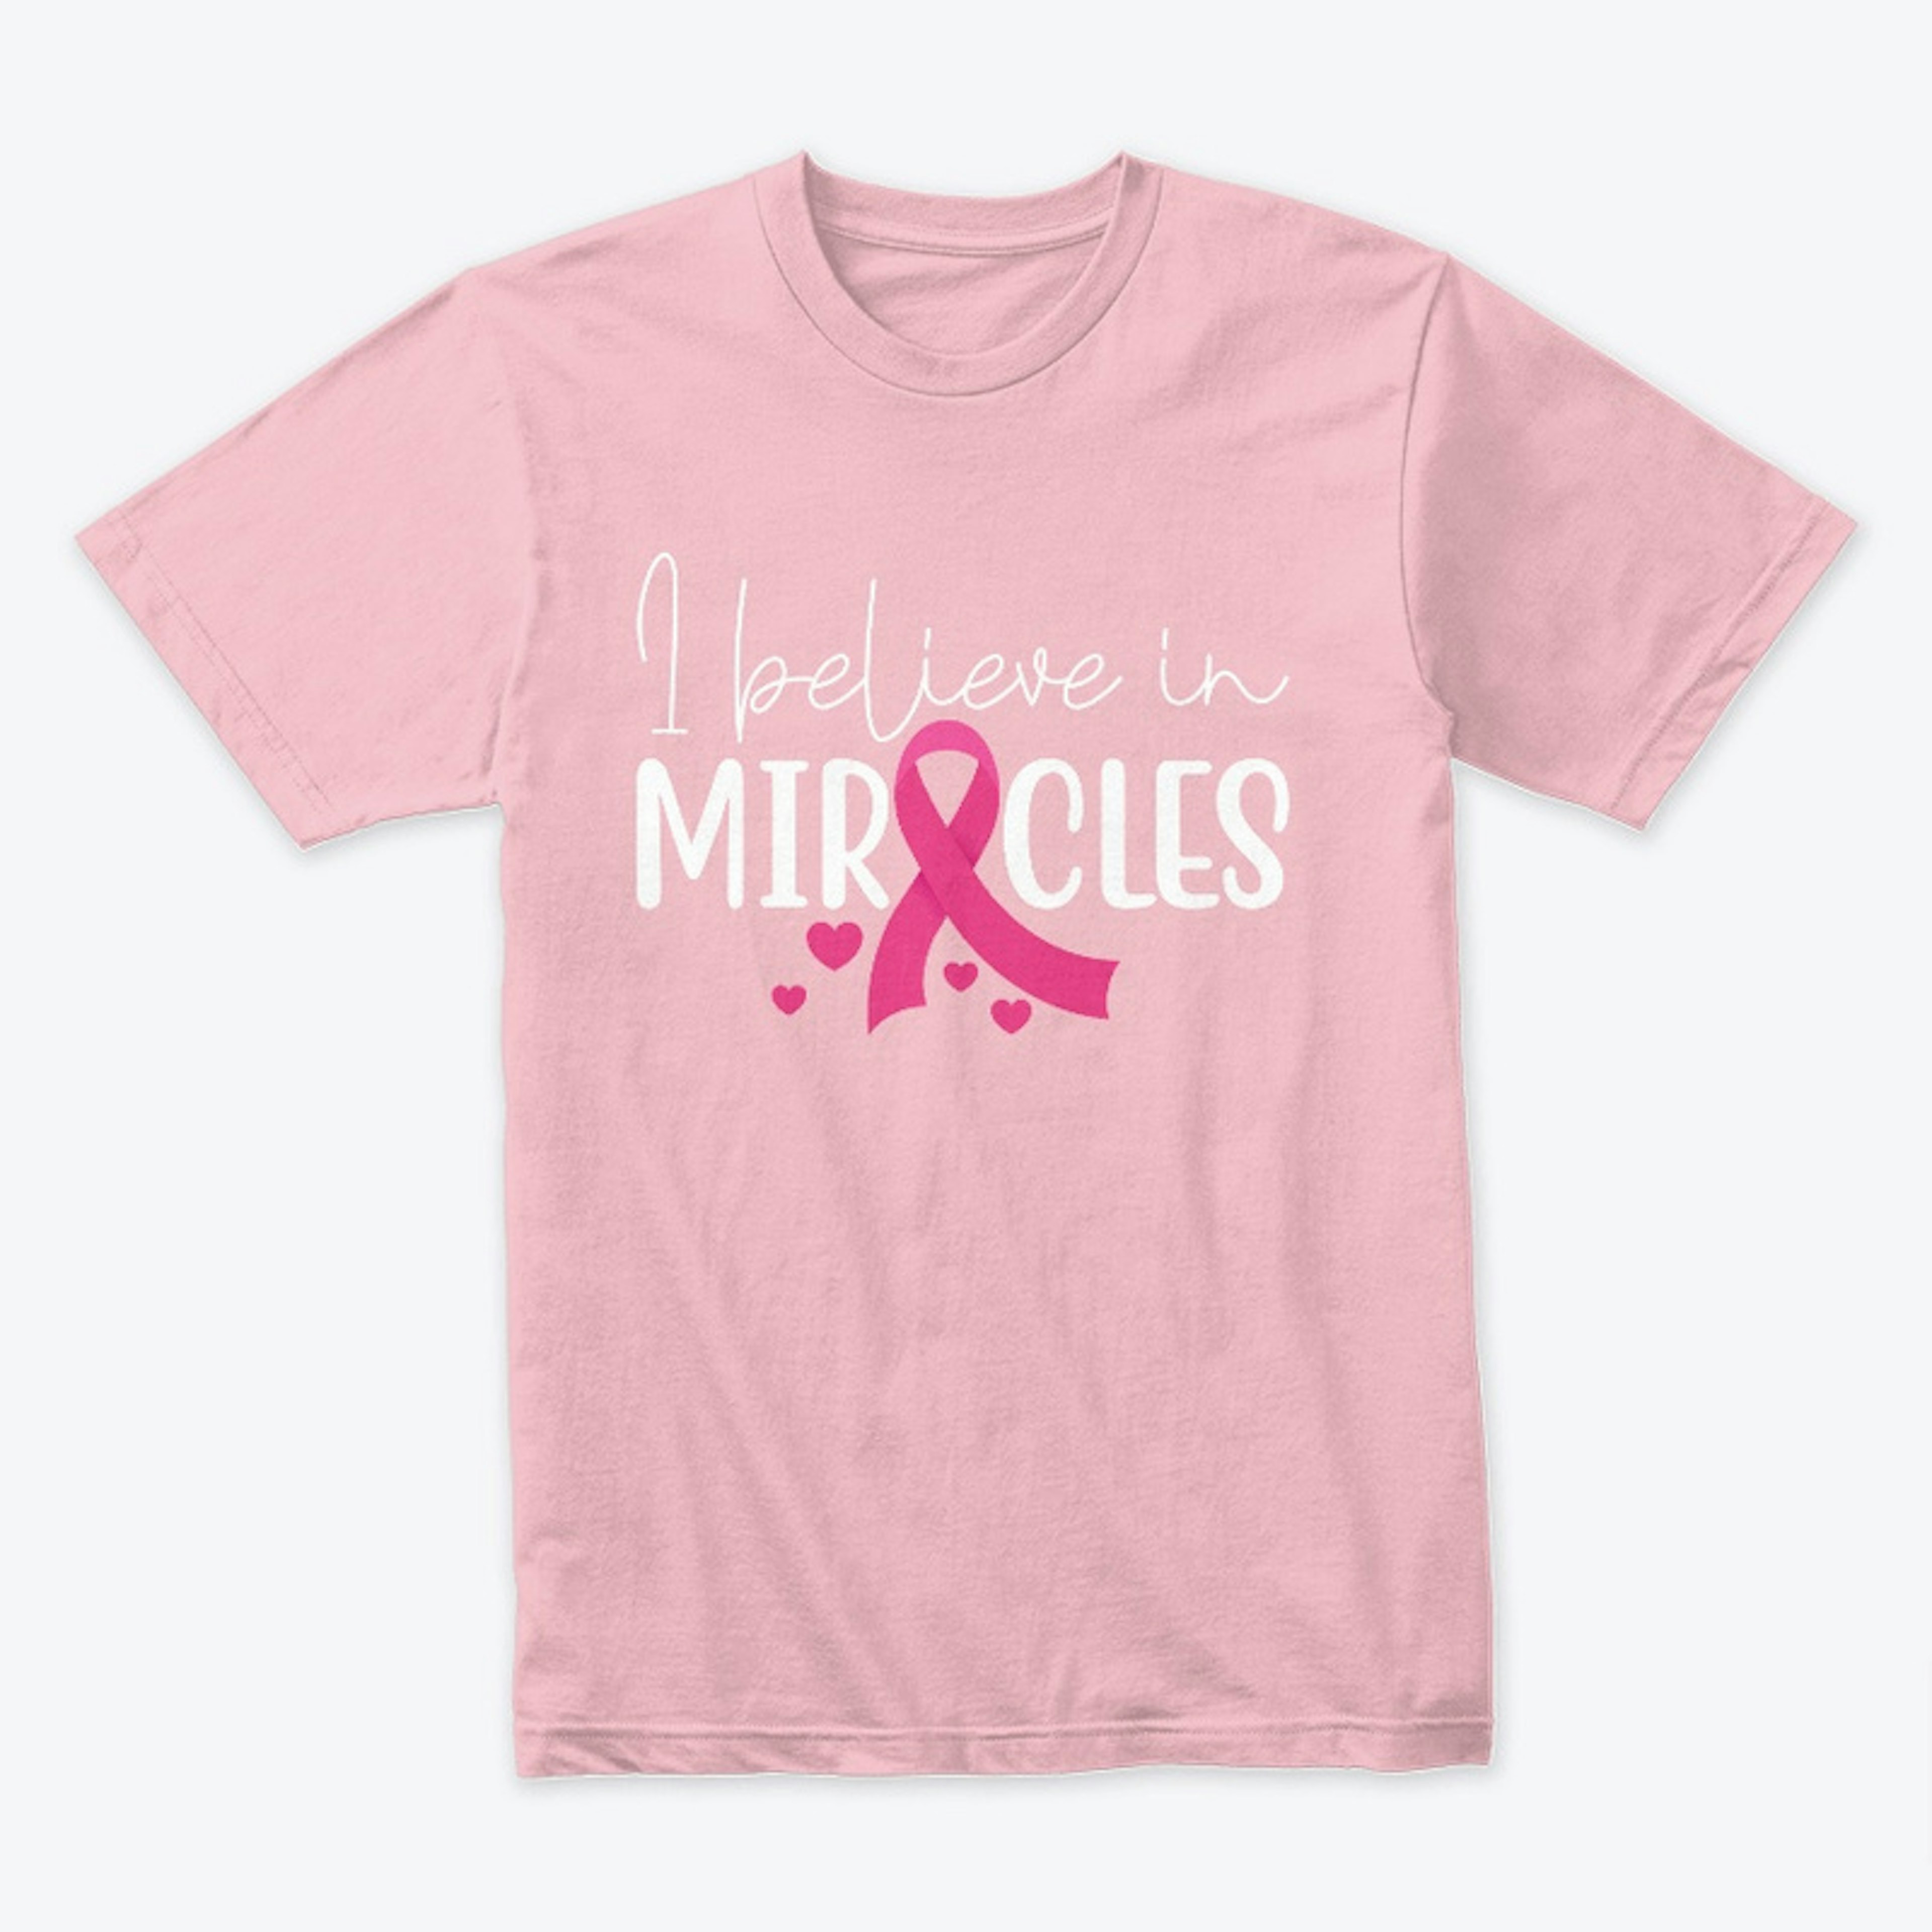 I Believe in Miracles Tees and More